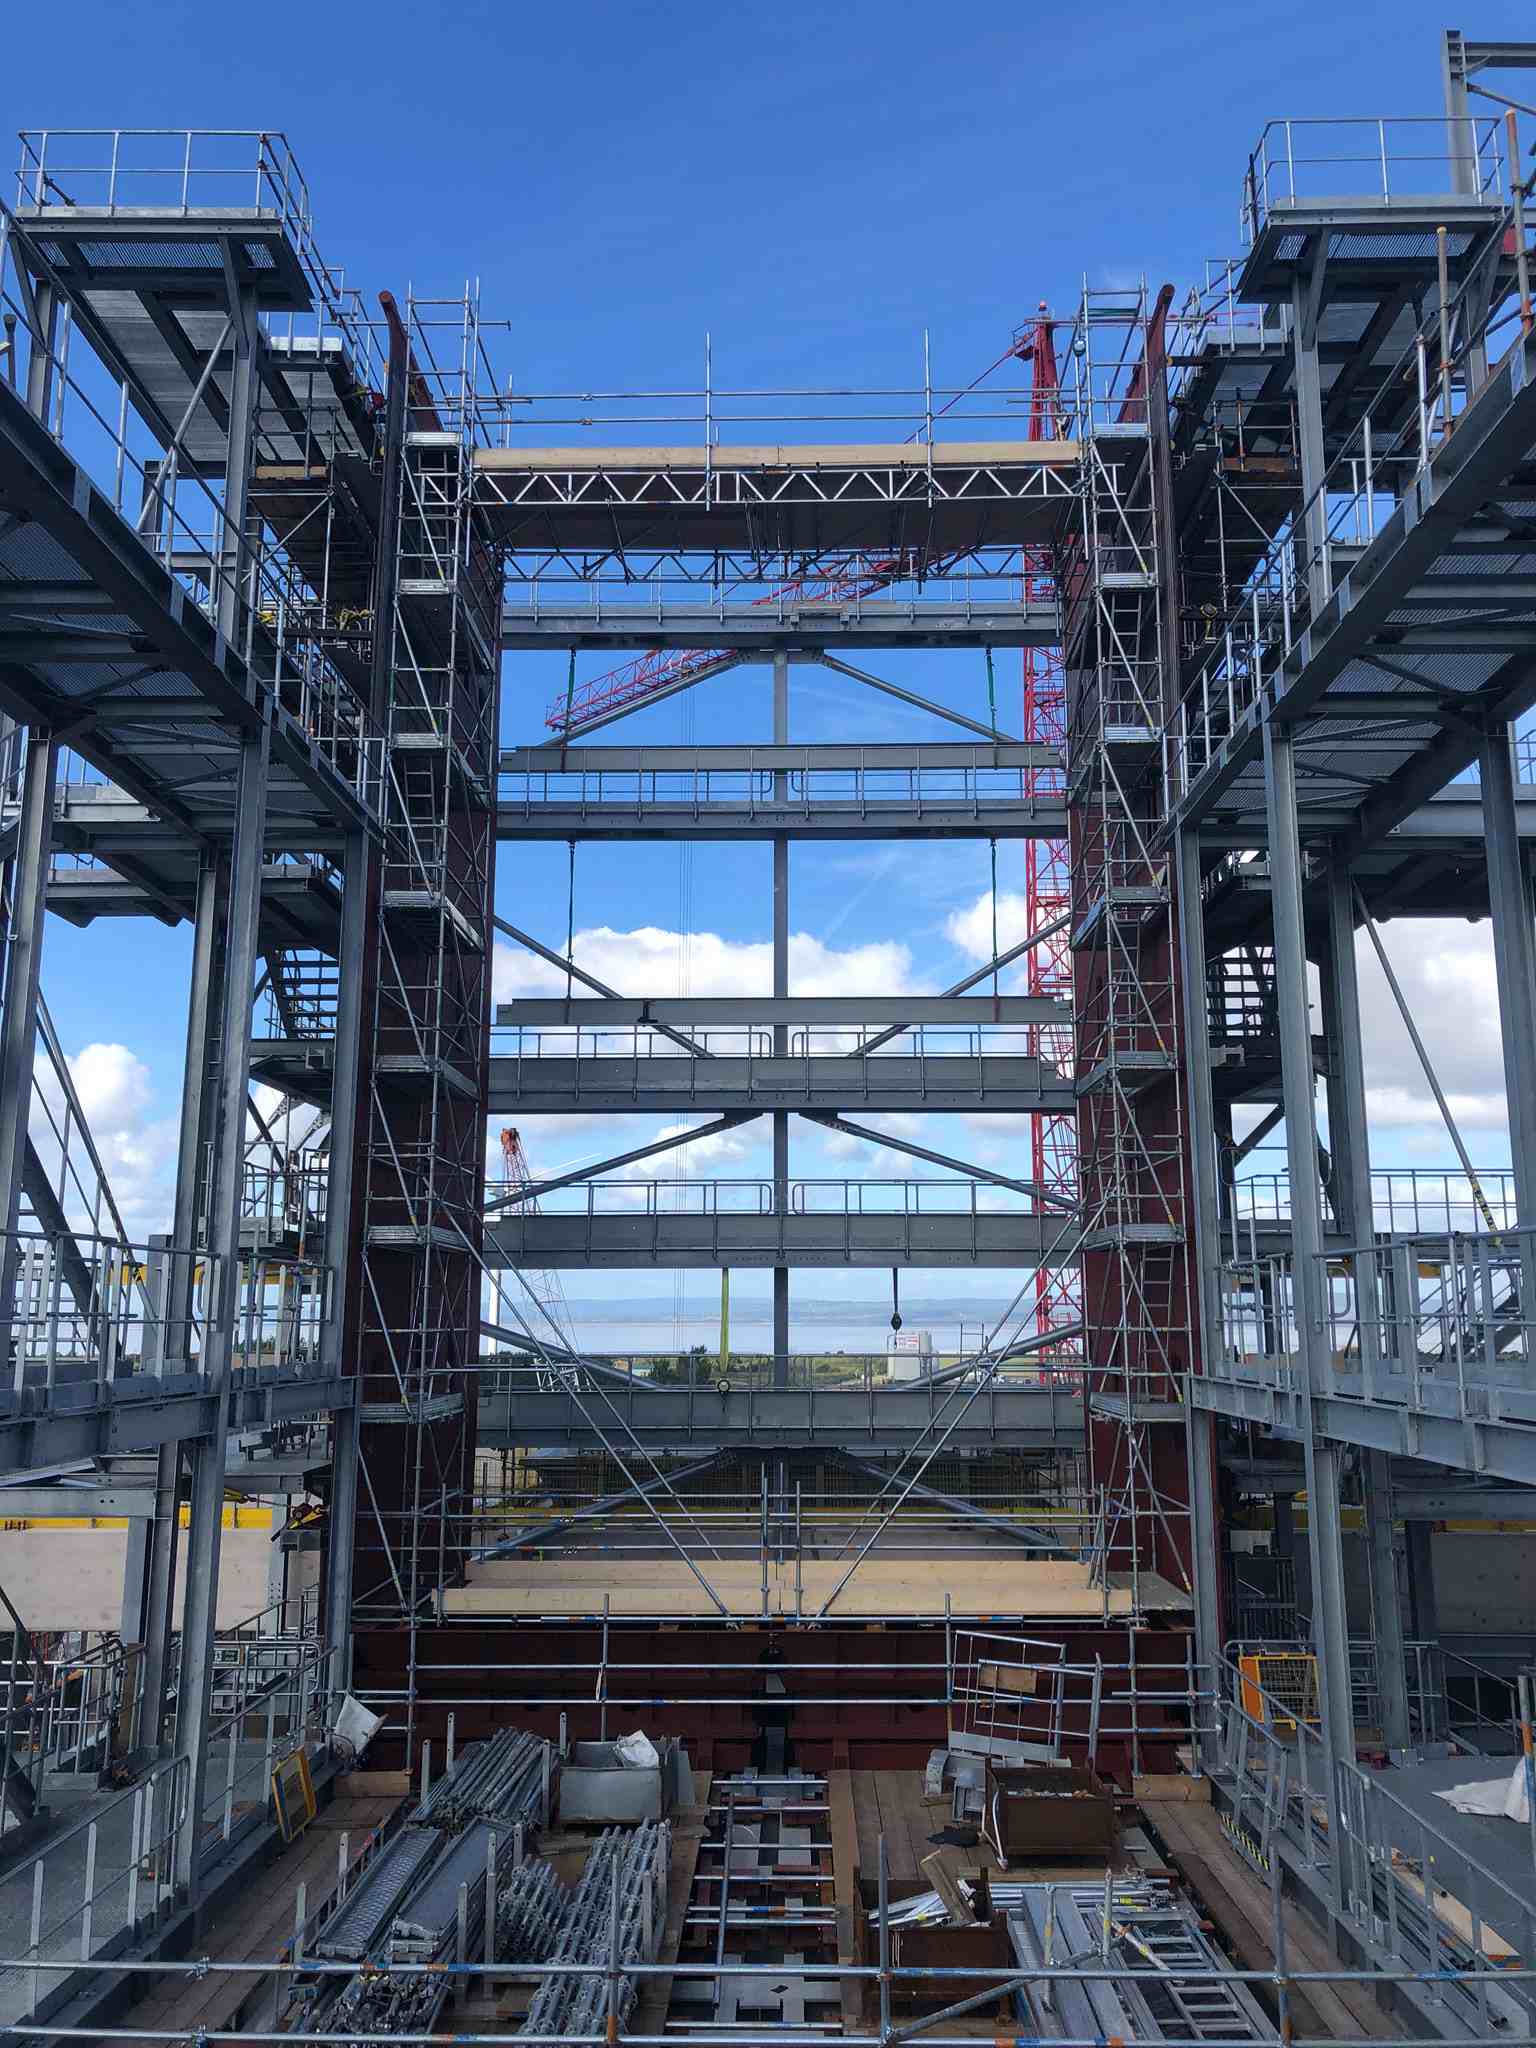 Access scaffolding of Avonmouth ERF.